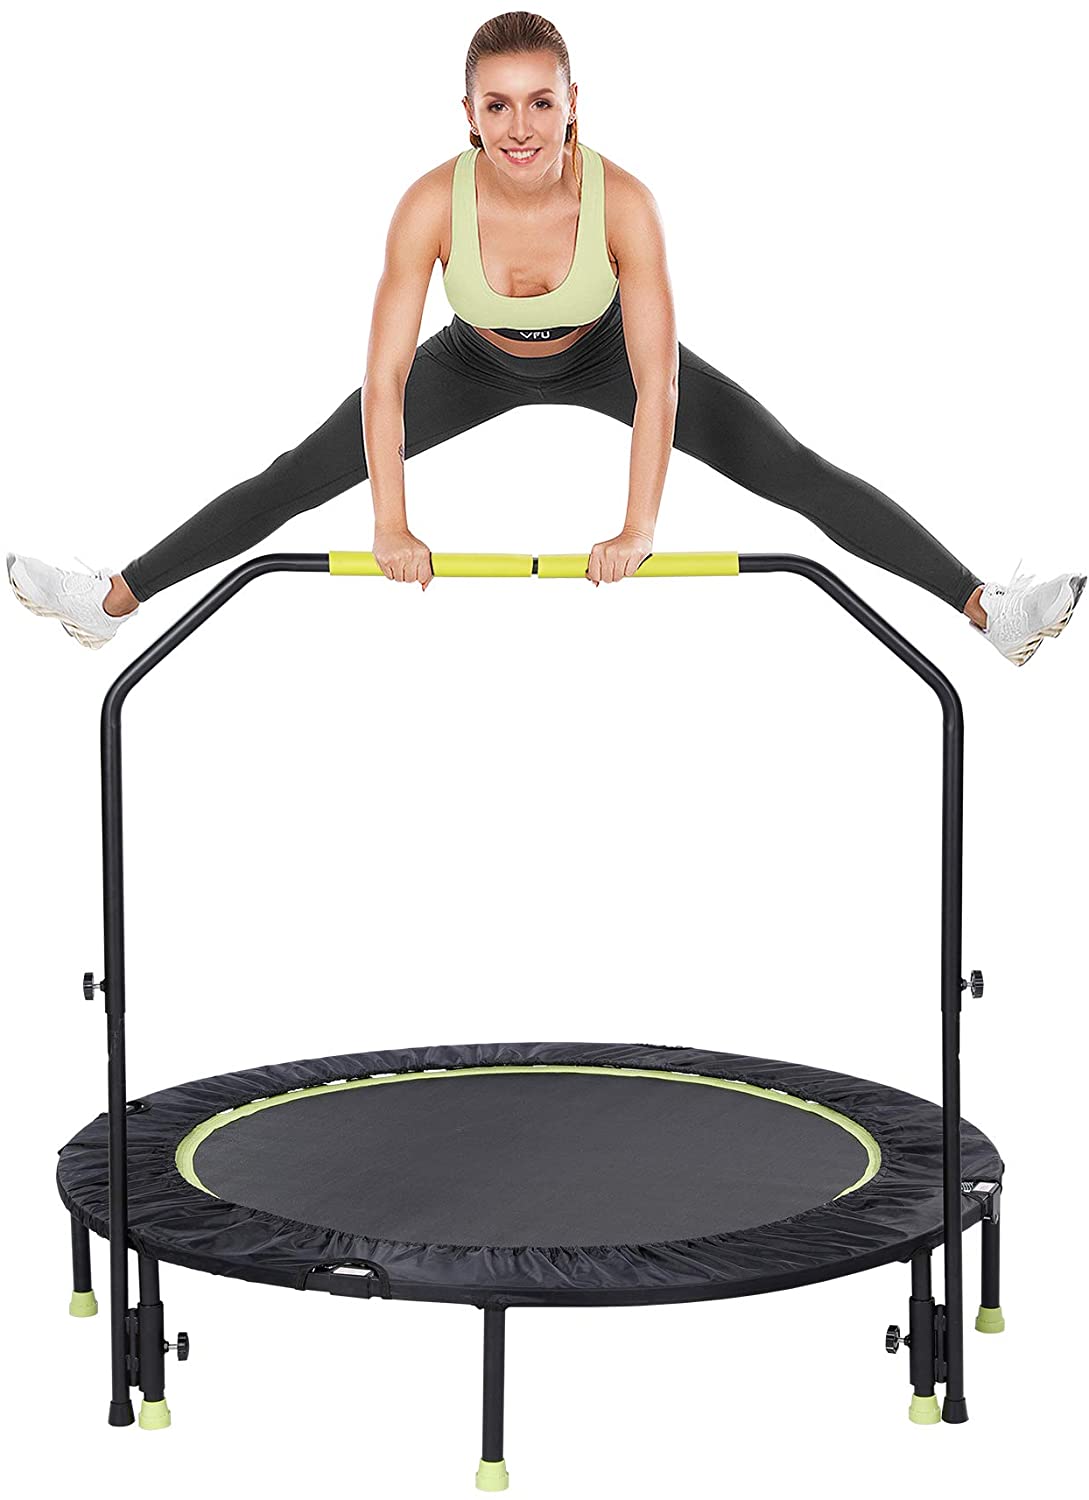 Gulujoy 50" Foldable Mini Trampoline, Fitness Rebounder with Adjustable Handle Bar for Adults Kids Home Cardio Exercise